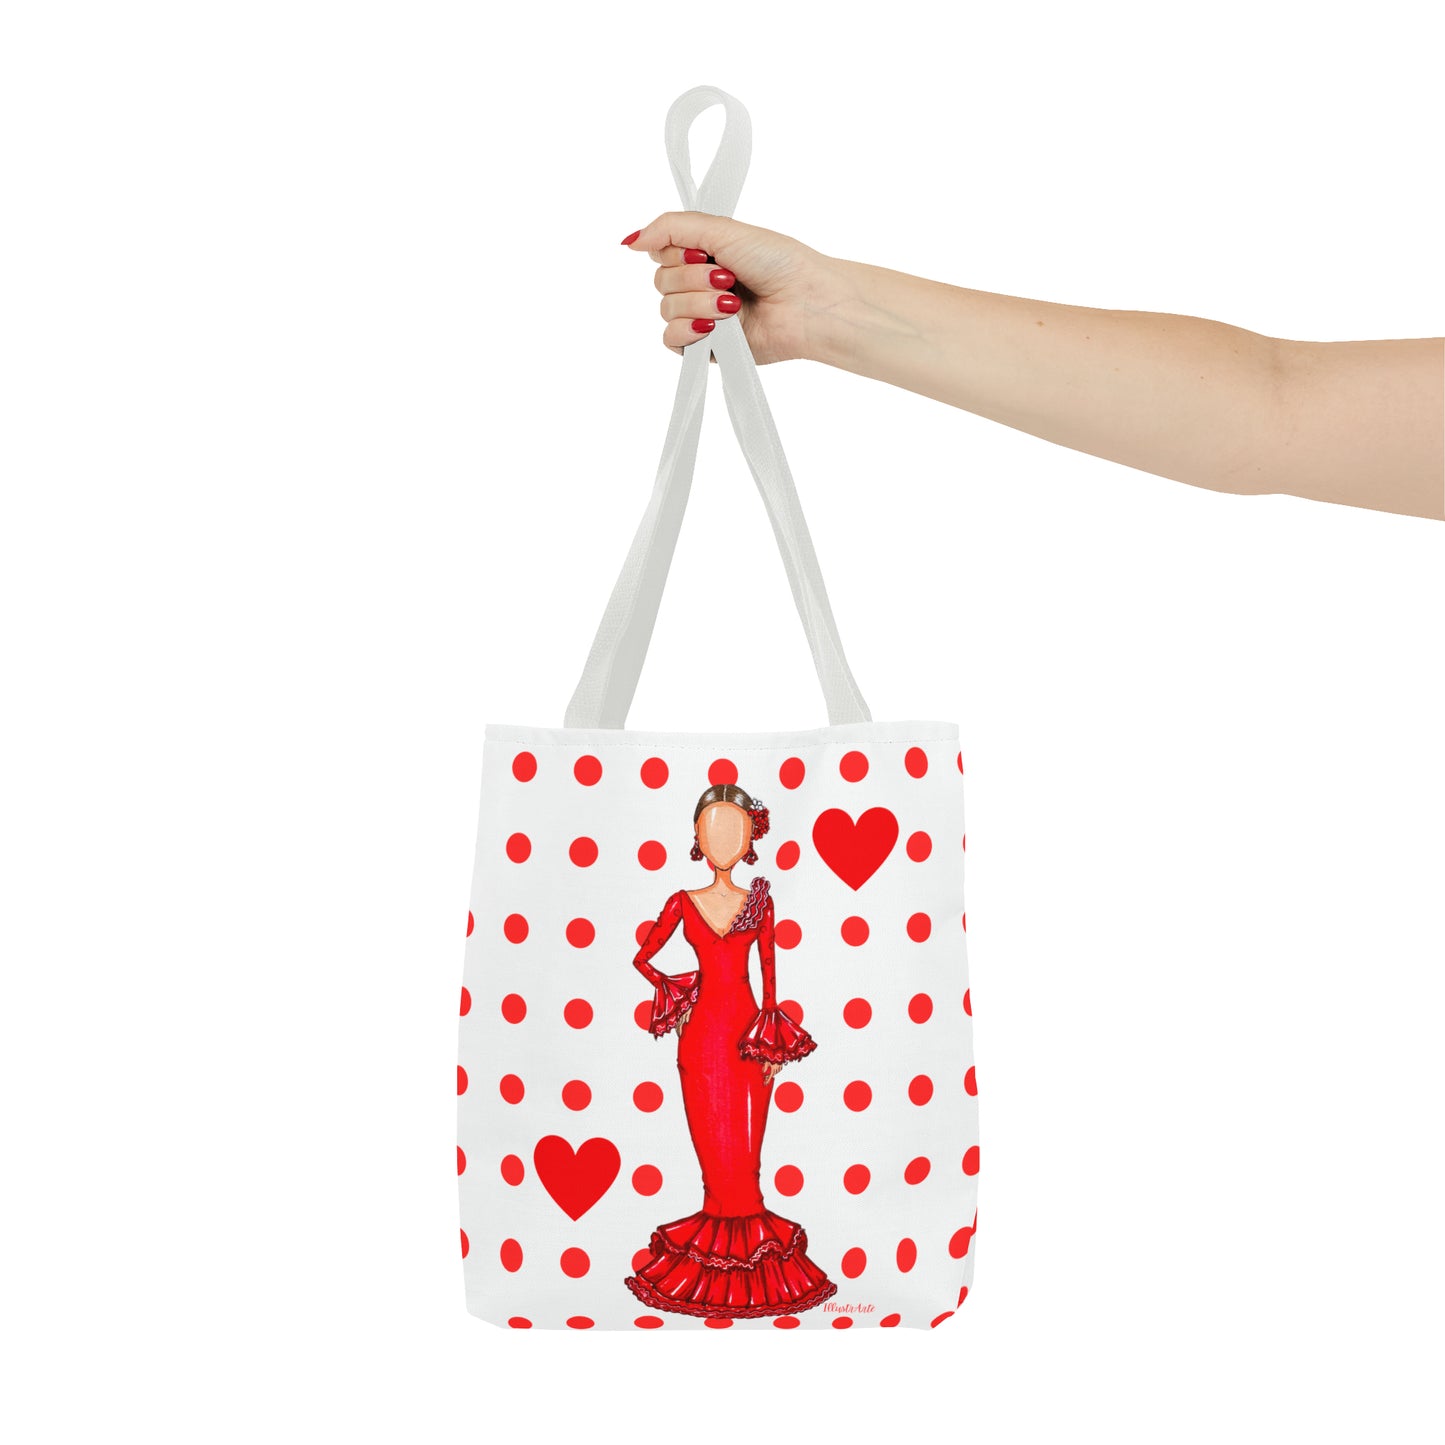 a woman's hand holding a red and white bag with a picture of a